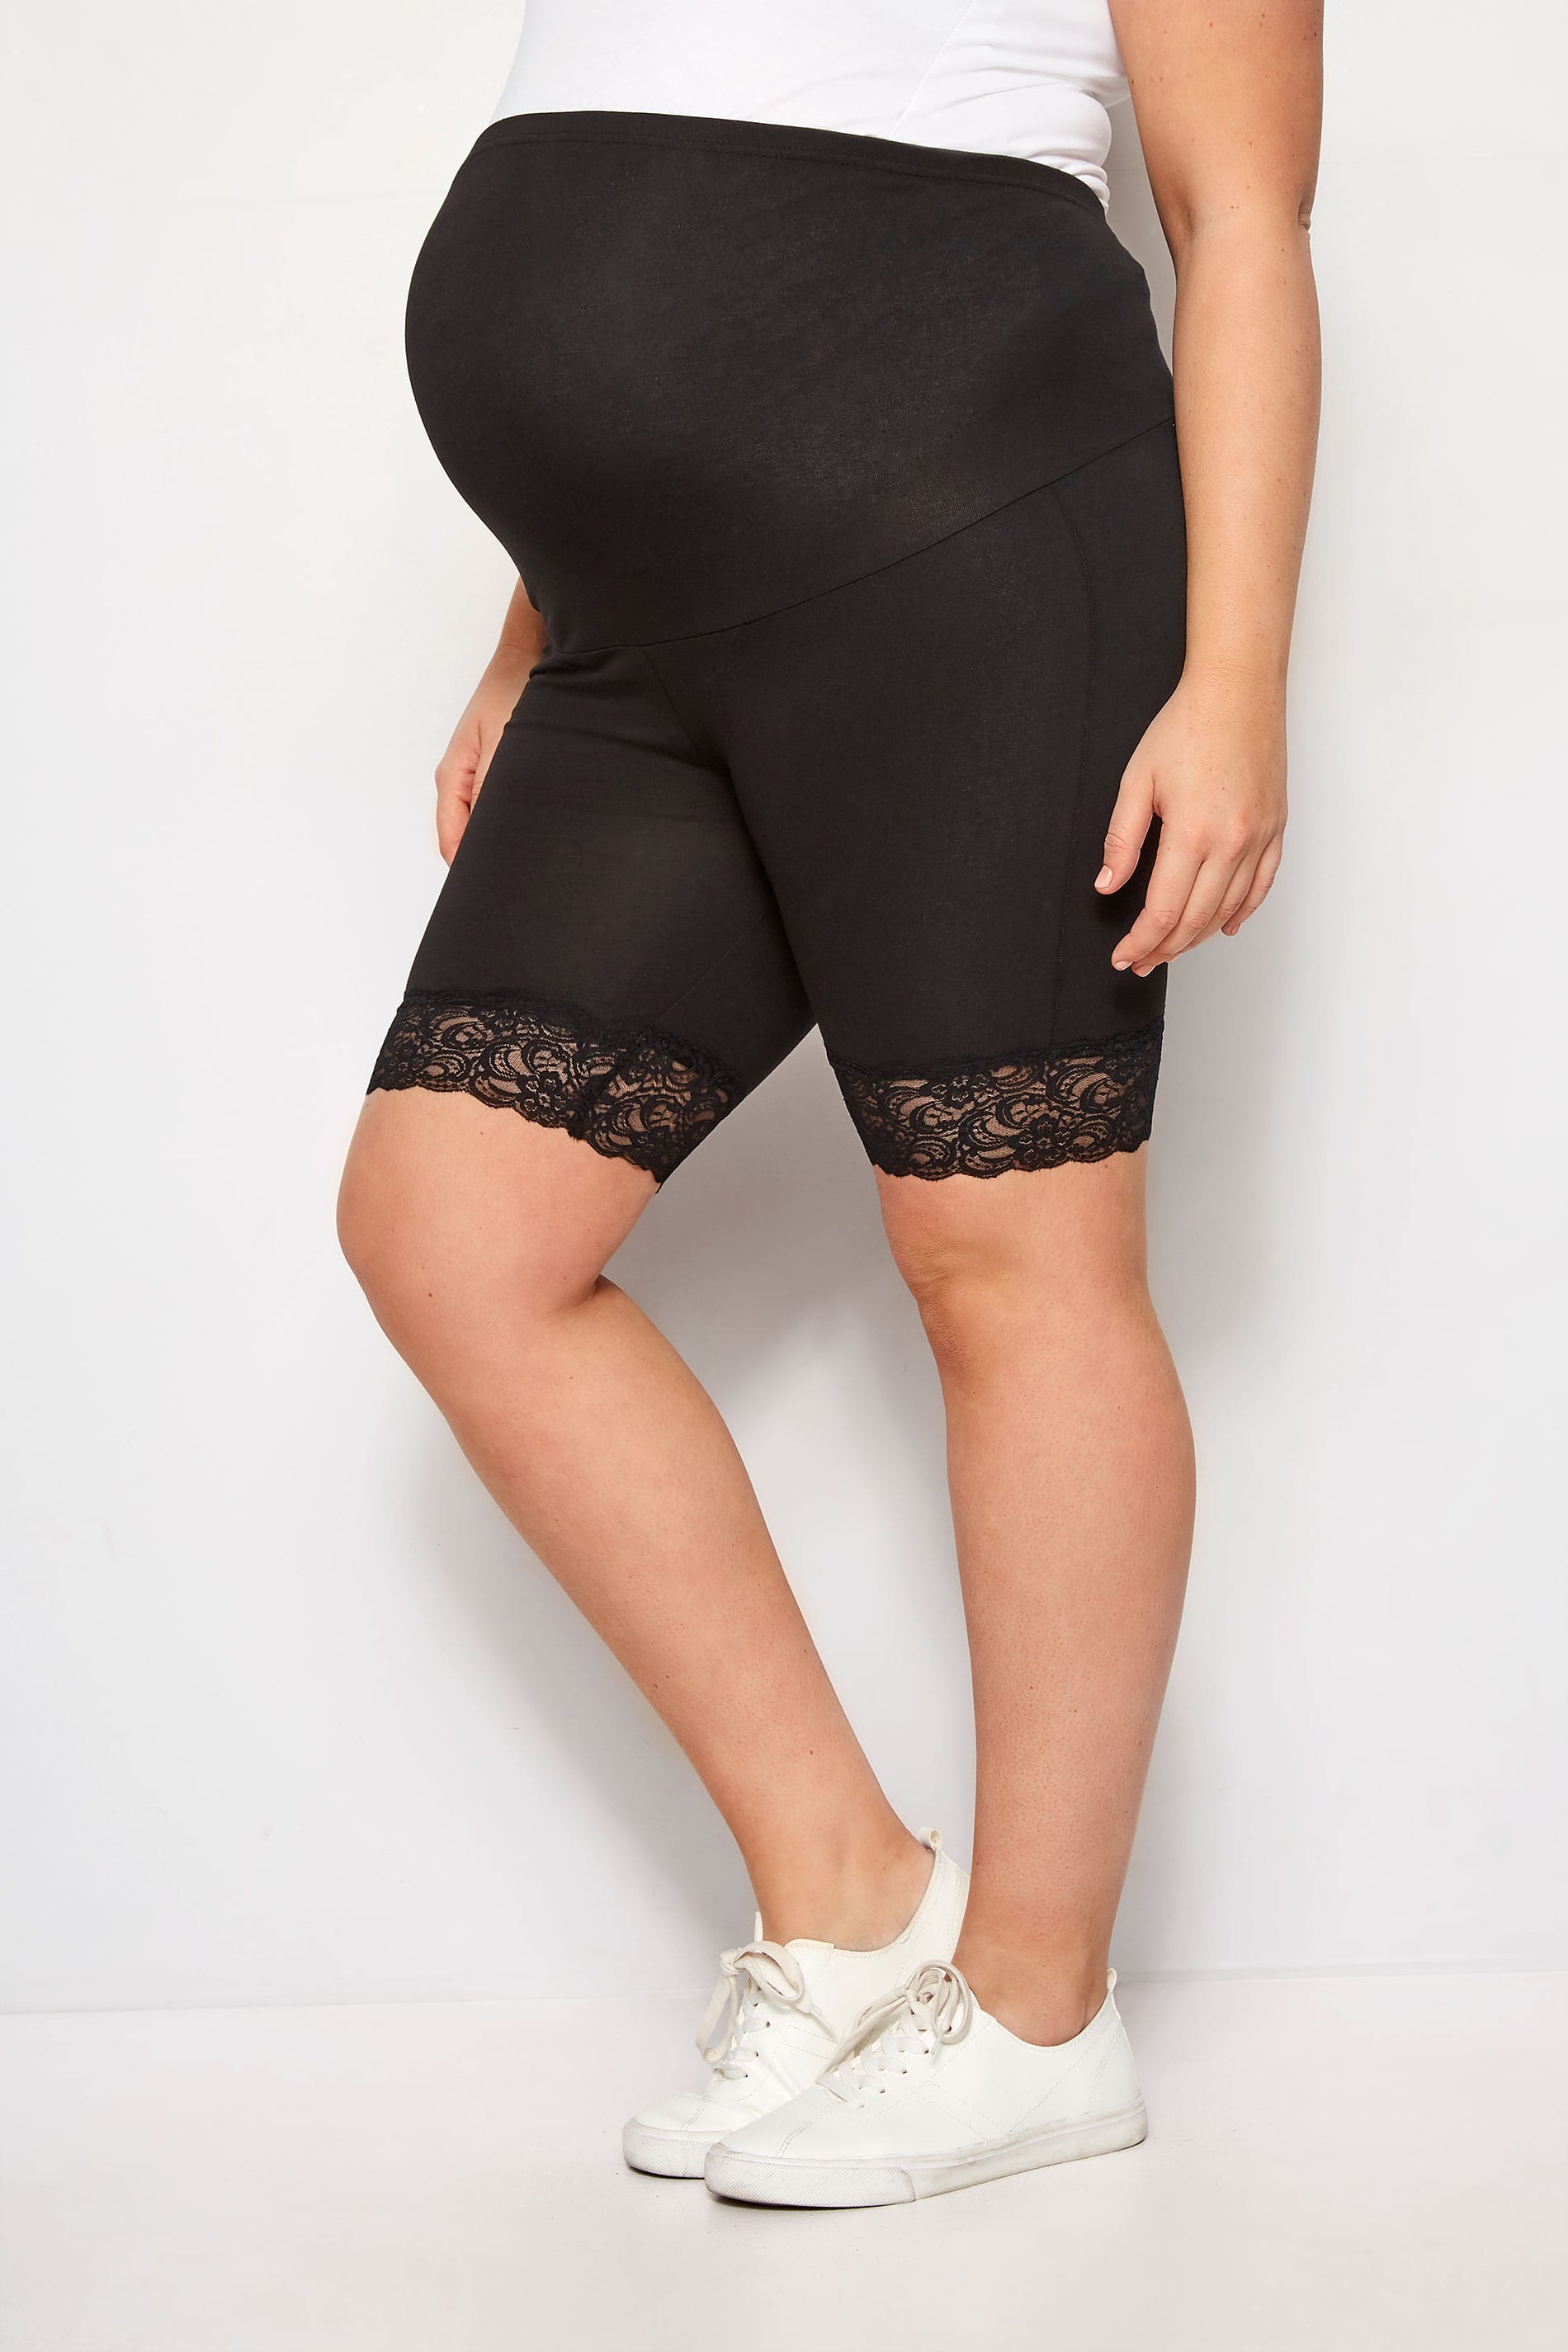 Yours Clothing Bump it up maternity black legging shorts with lace trim